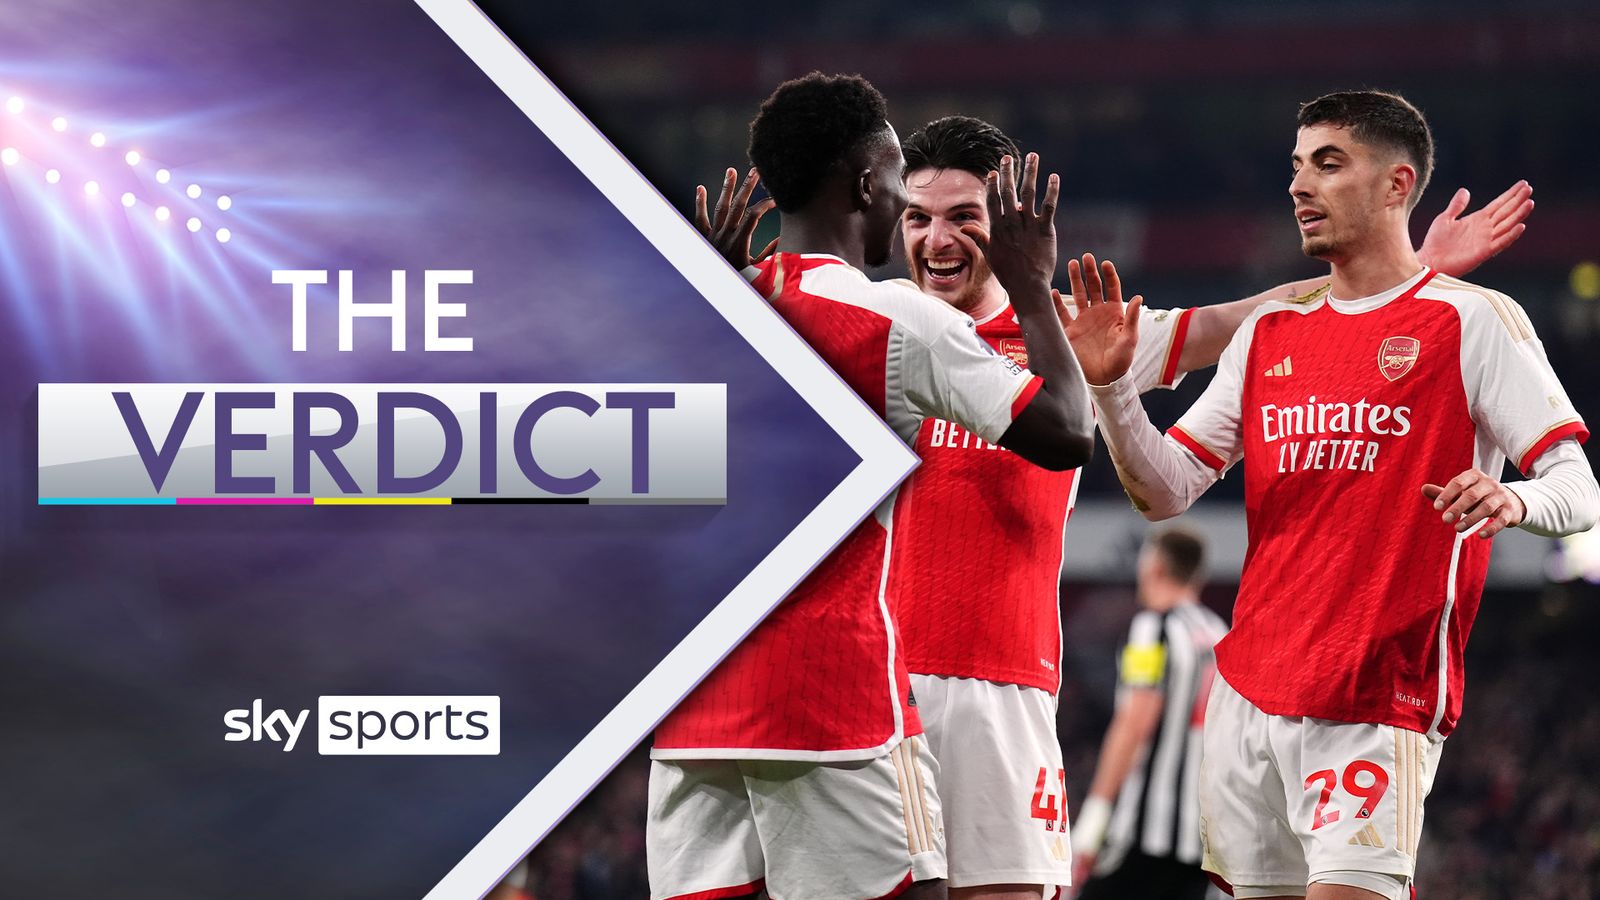 The Verdict: Arsenal produce ‘statement’ victory